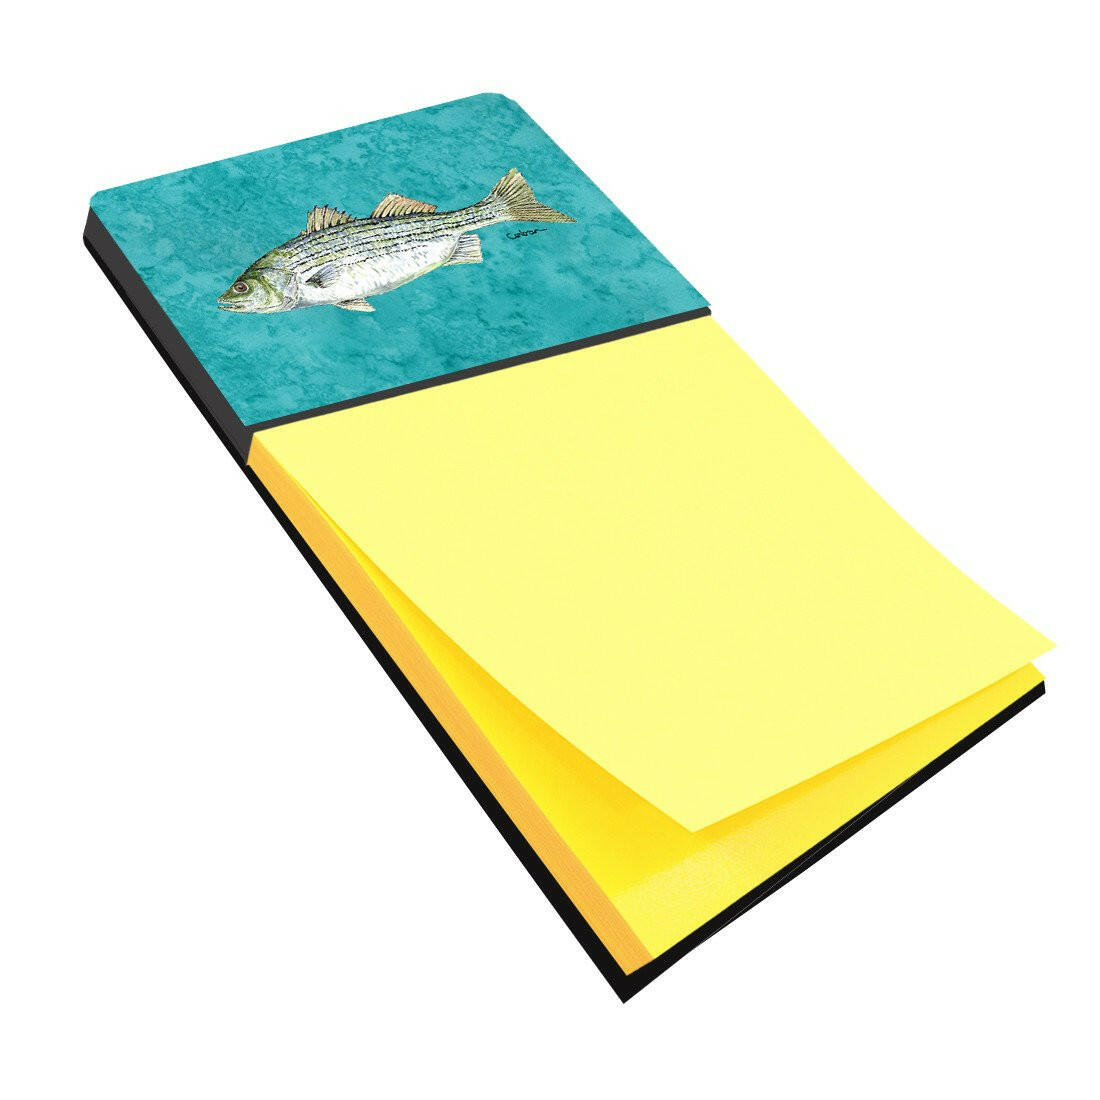 Striped Bass Fish Refiillable Sticky Note Holder or Postit Note Dispenser 8720SN by Caroline's Treasures